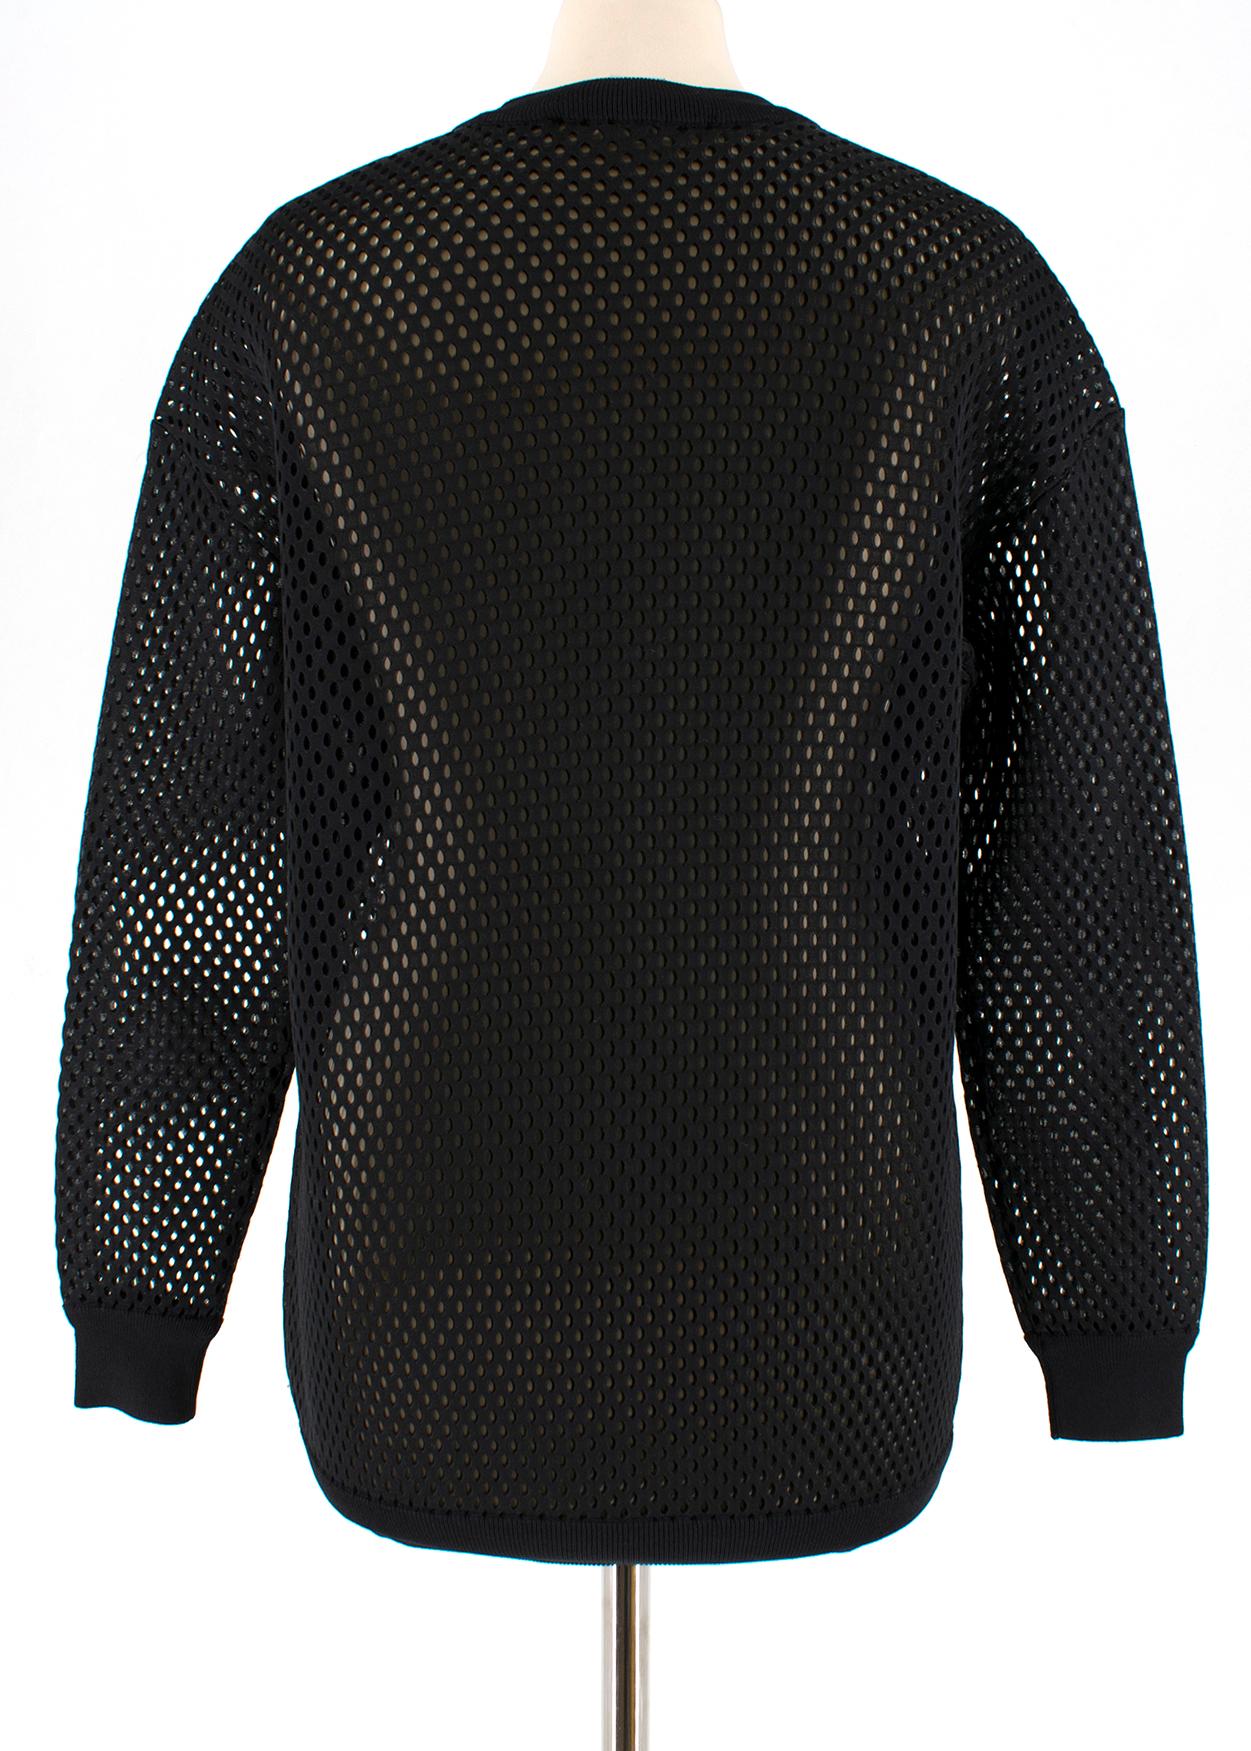 Stella McCartney Black Mesh Neoprene Horse Print Jumper  estimated size XS In Excellent Condition For Sale In London, GB